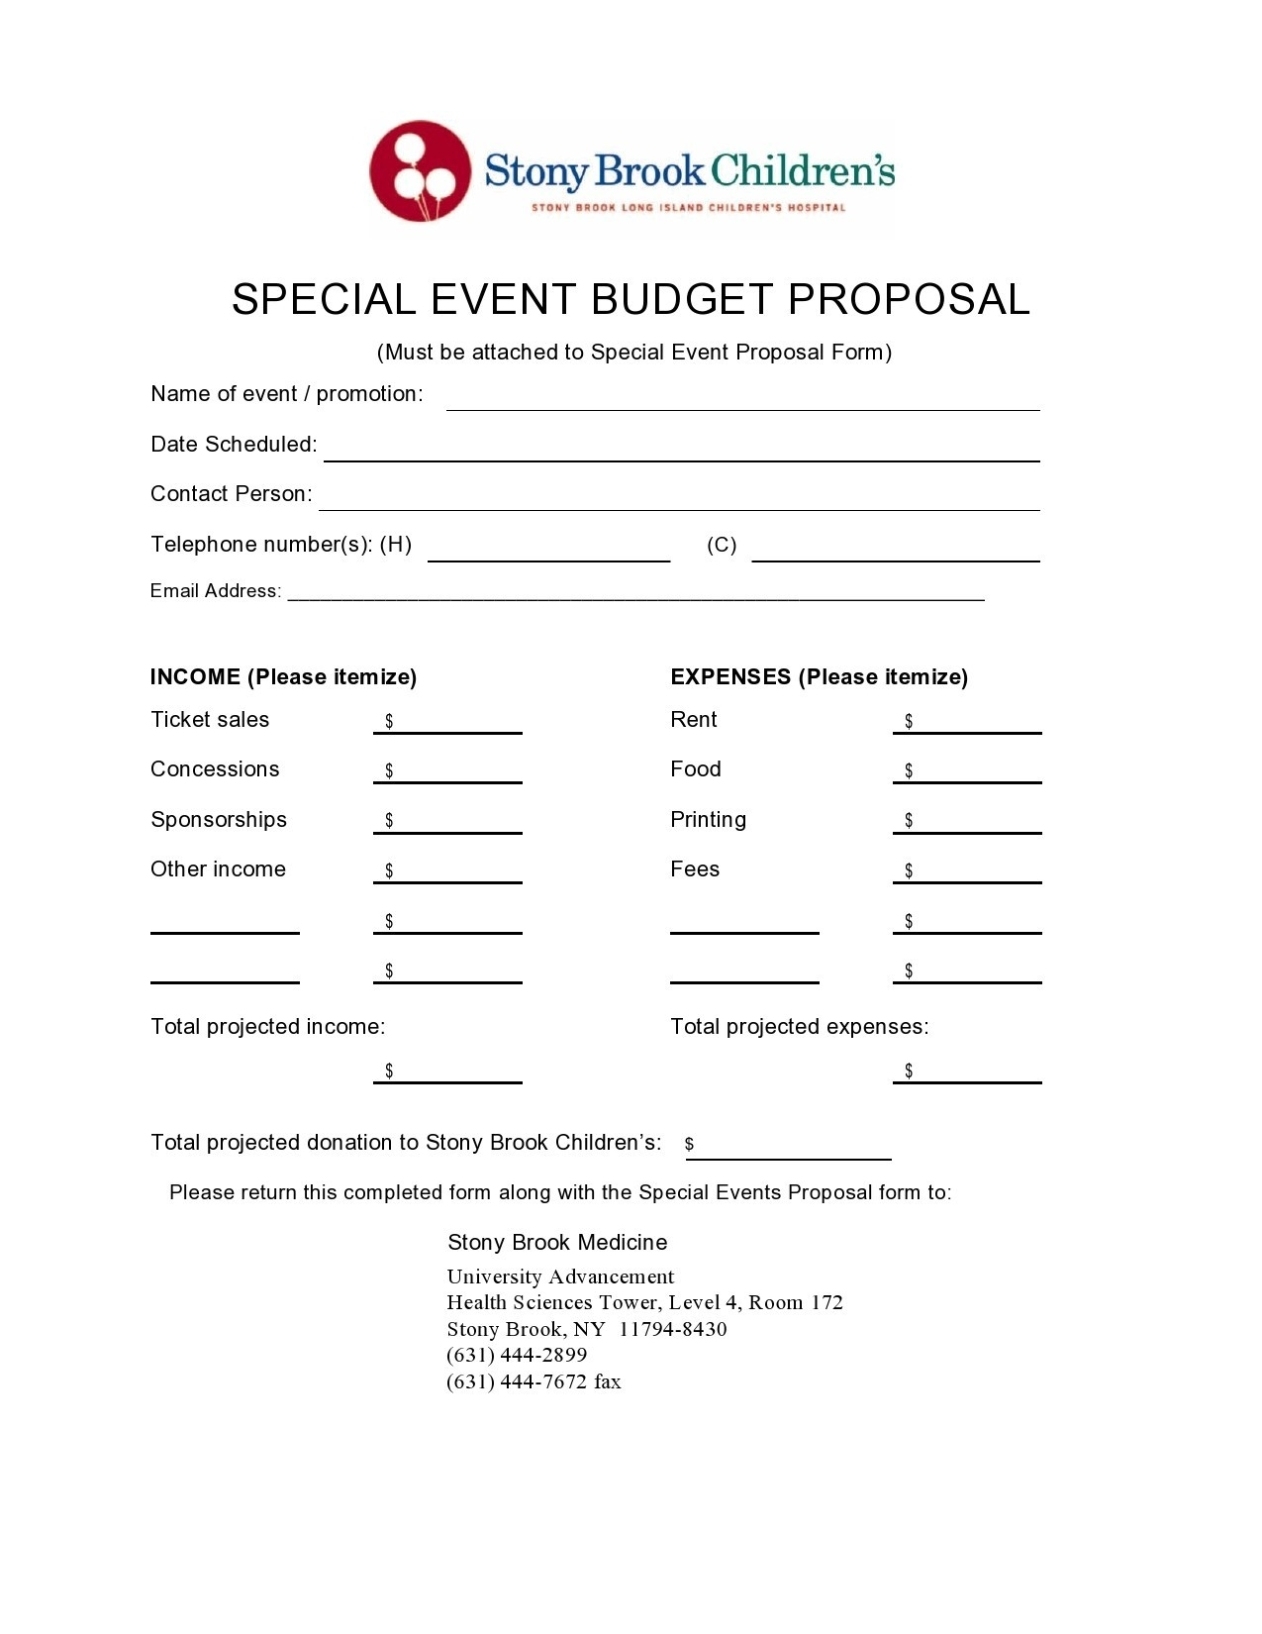 50 Free Budget Proposal Templates (Word & Excel) ᐅ Templatelab Regarding Proposed Budget Template